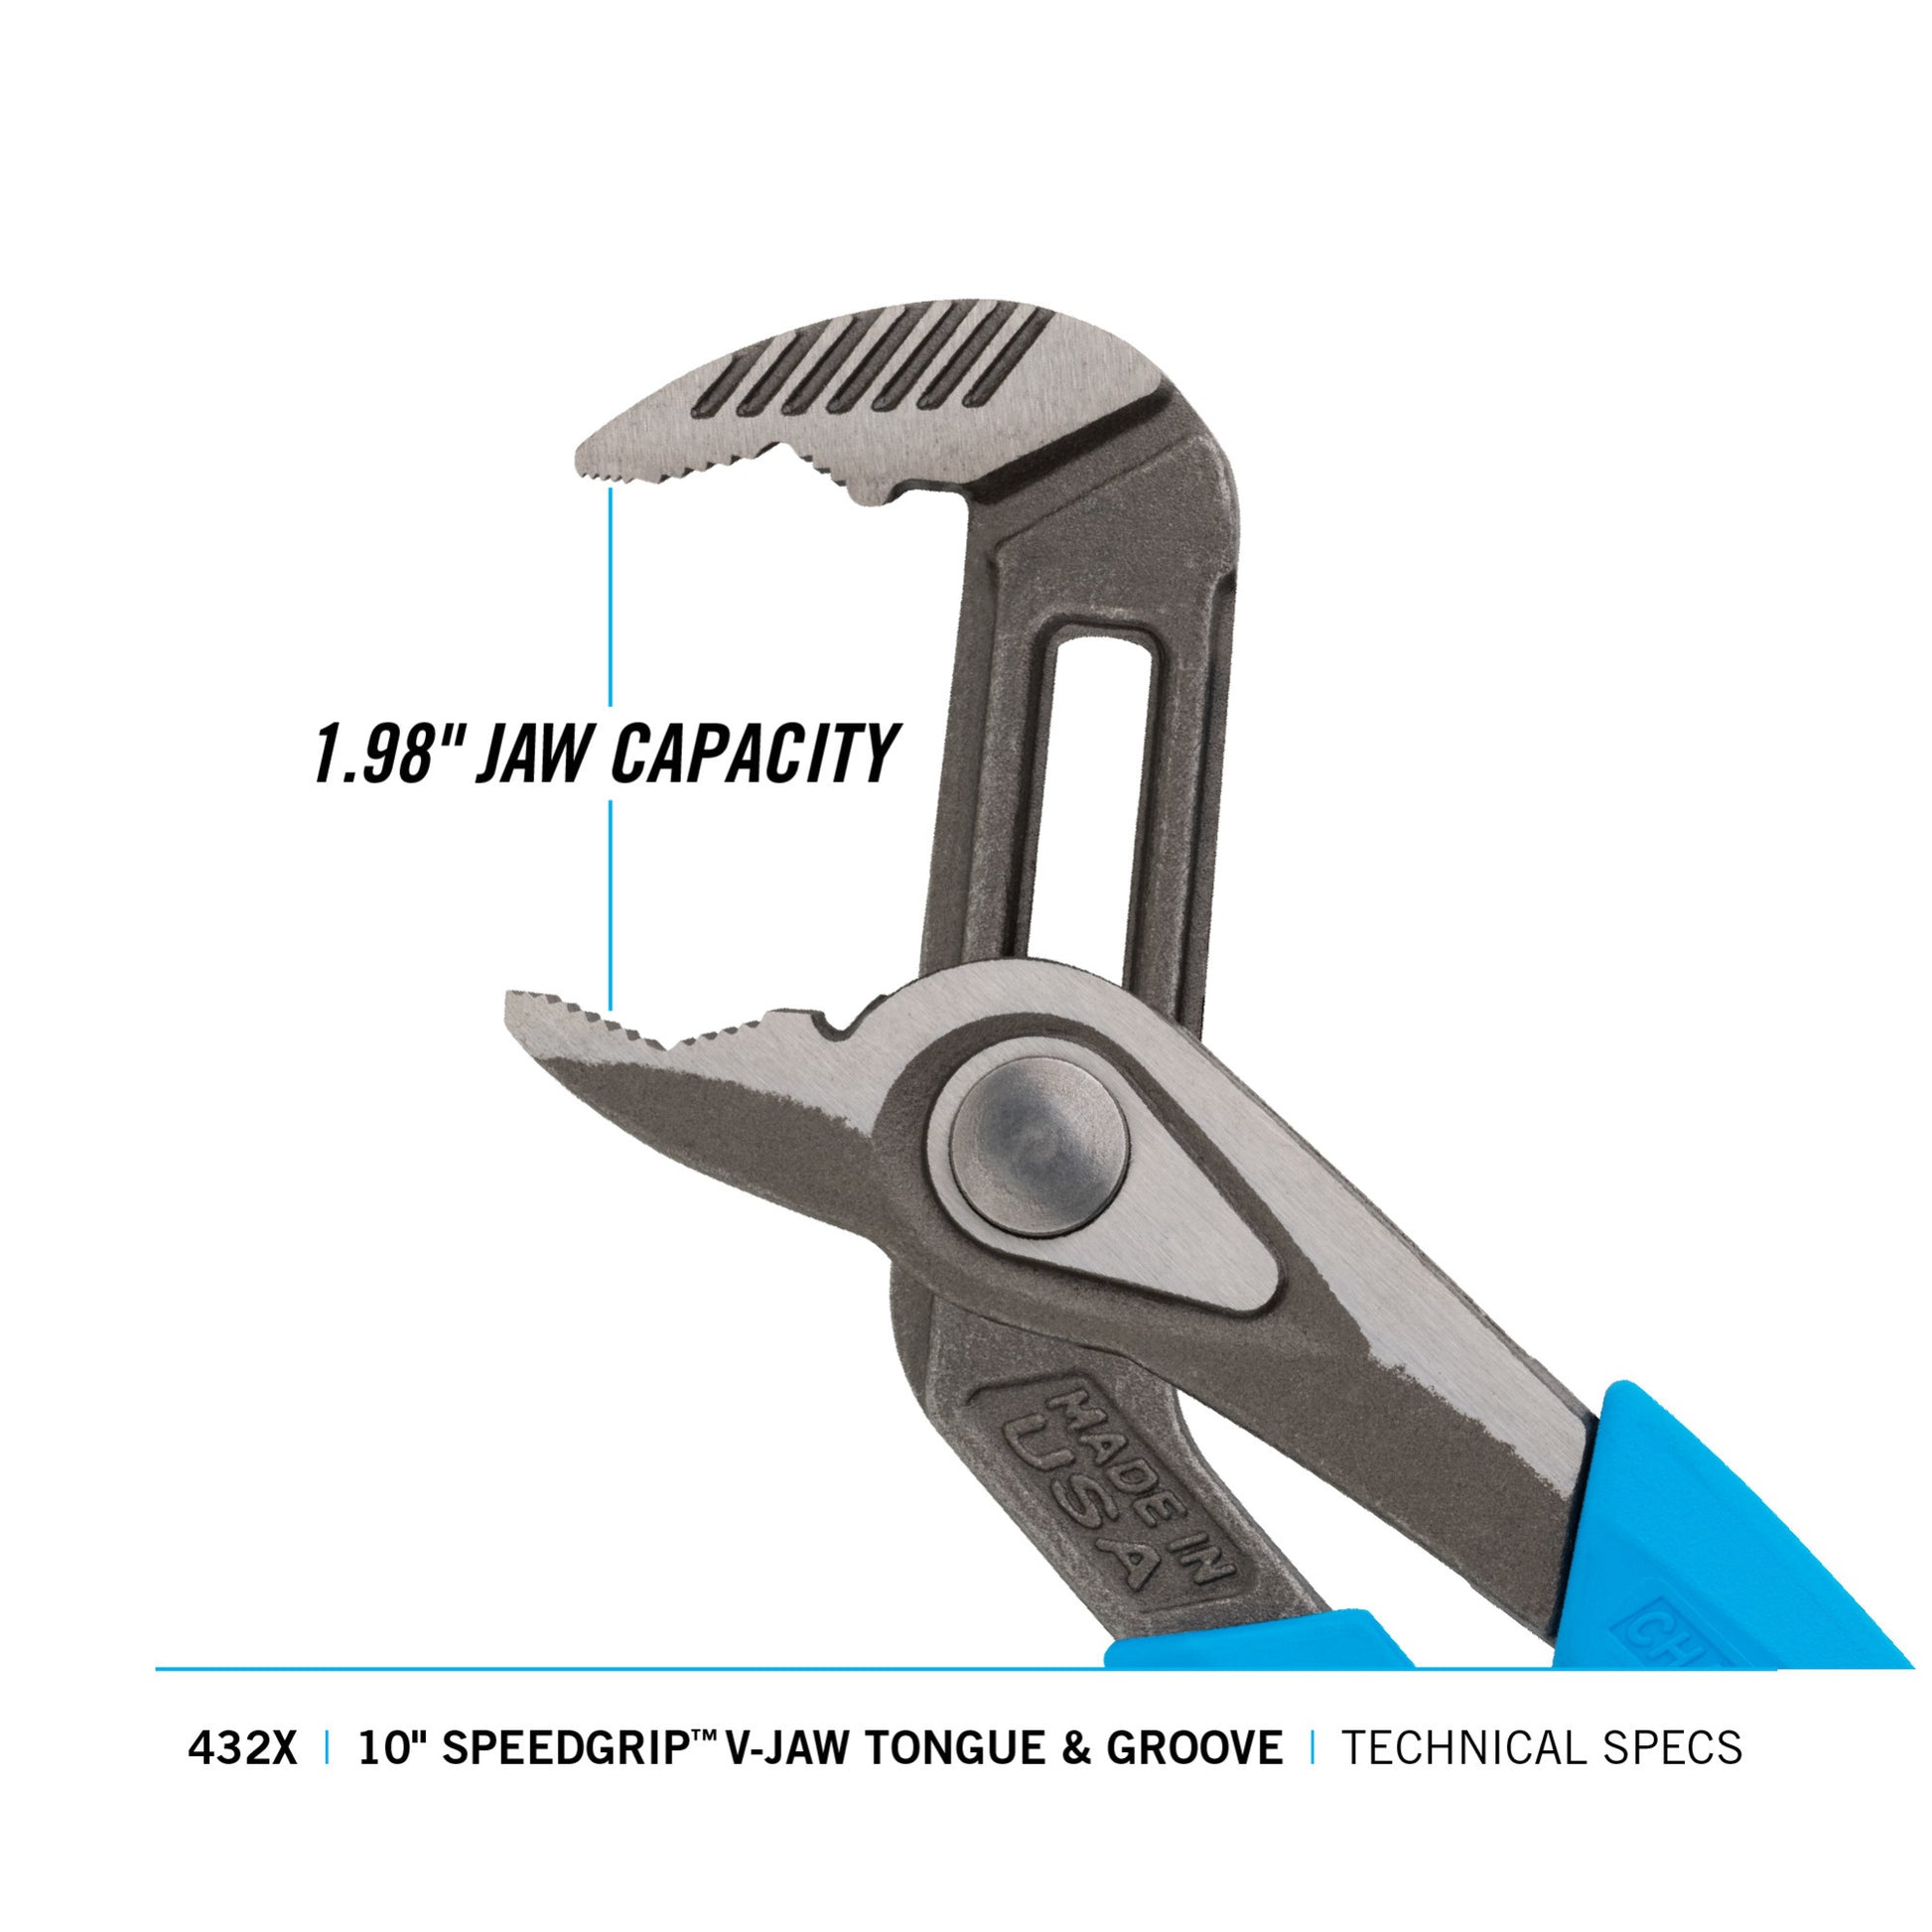 Soft Jaw Pliers Lg. Channel Lock (#1703) — PROTECH PRODUCTS